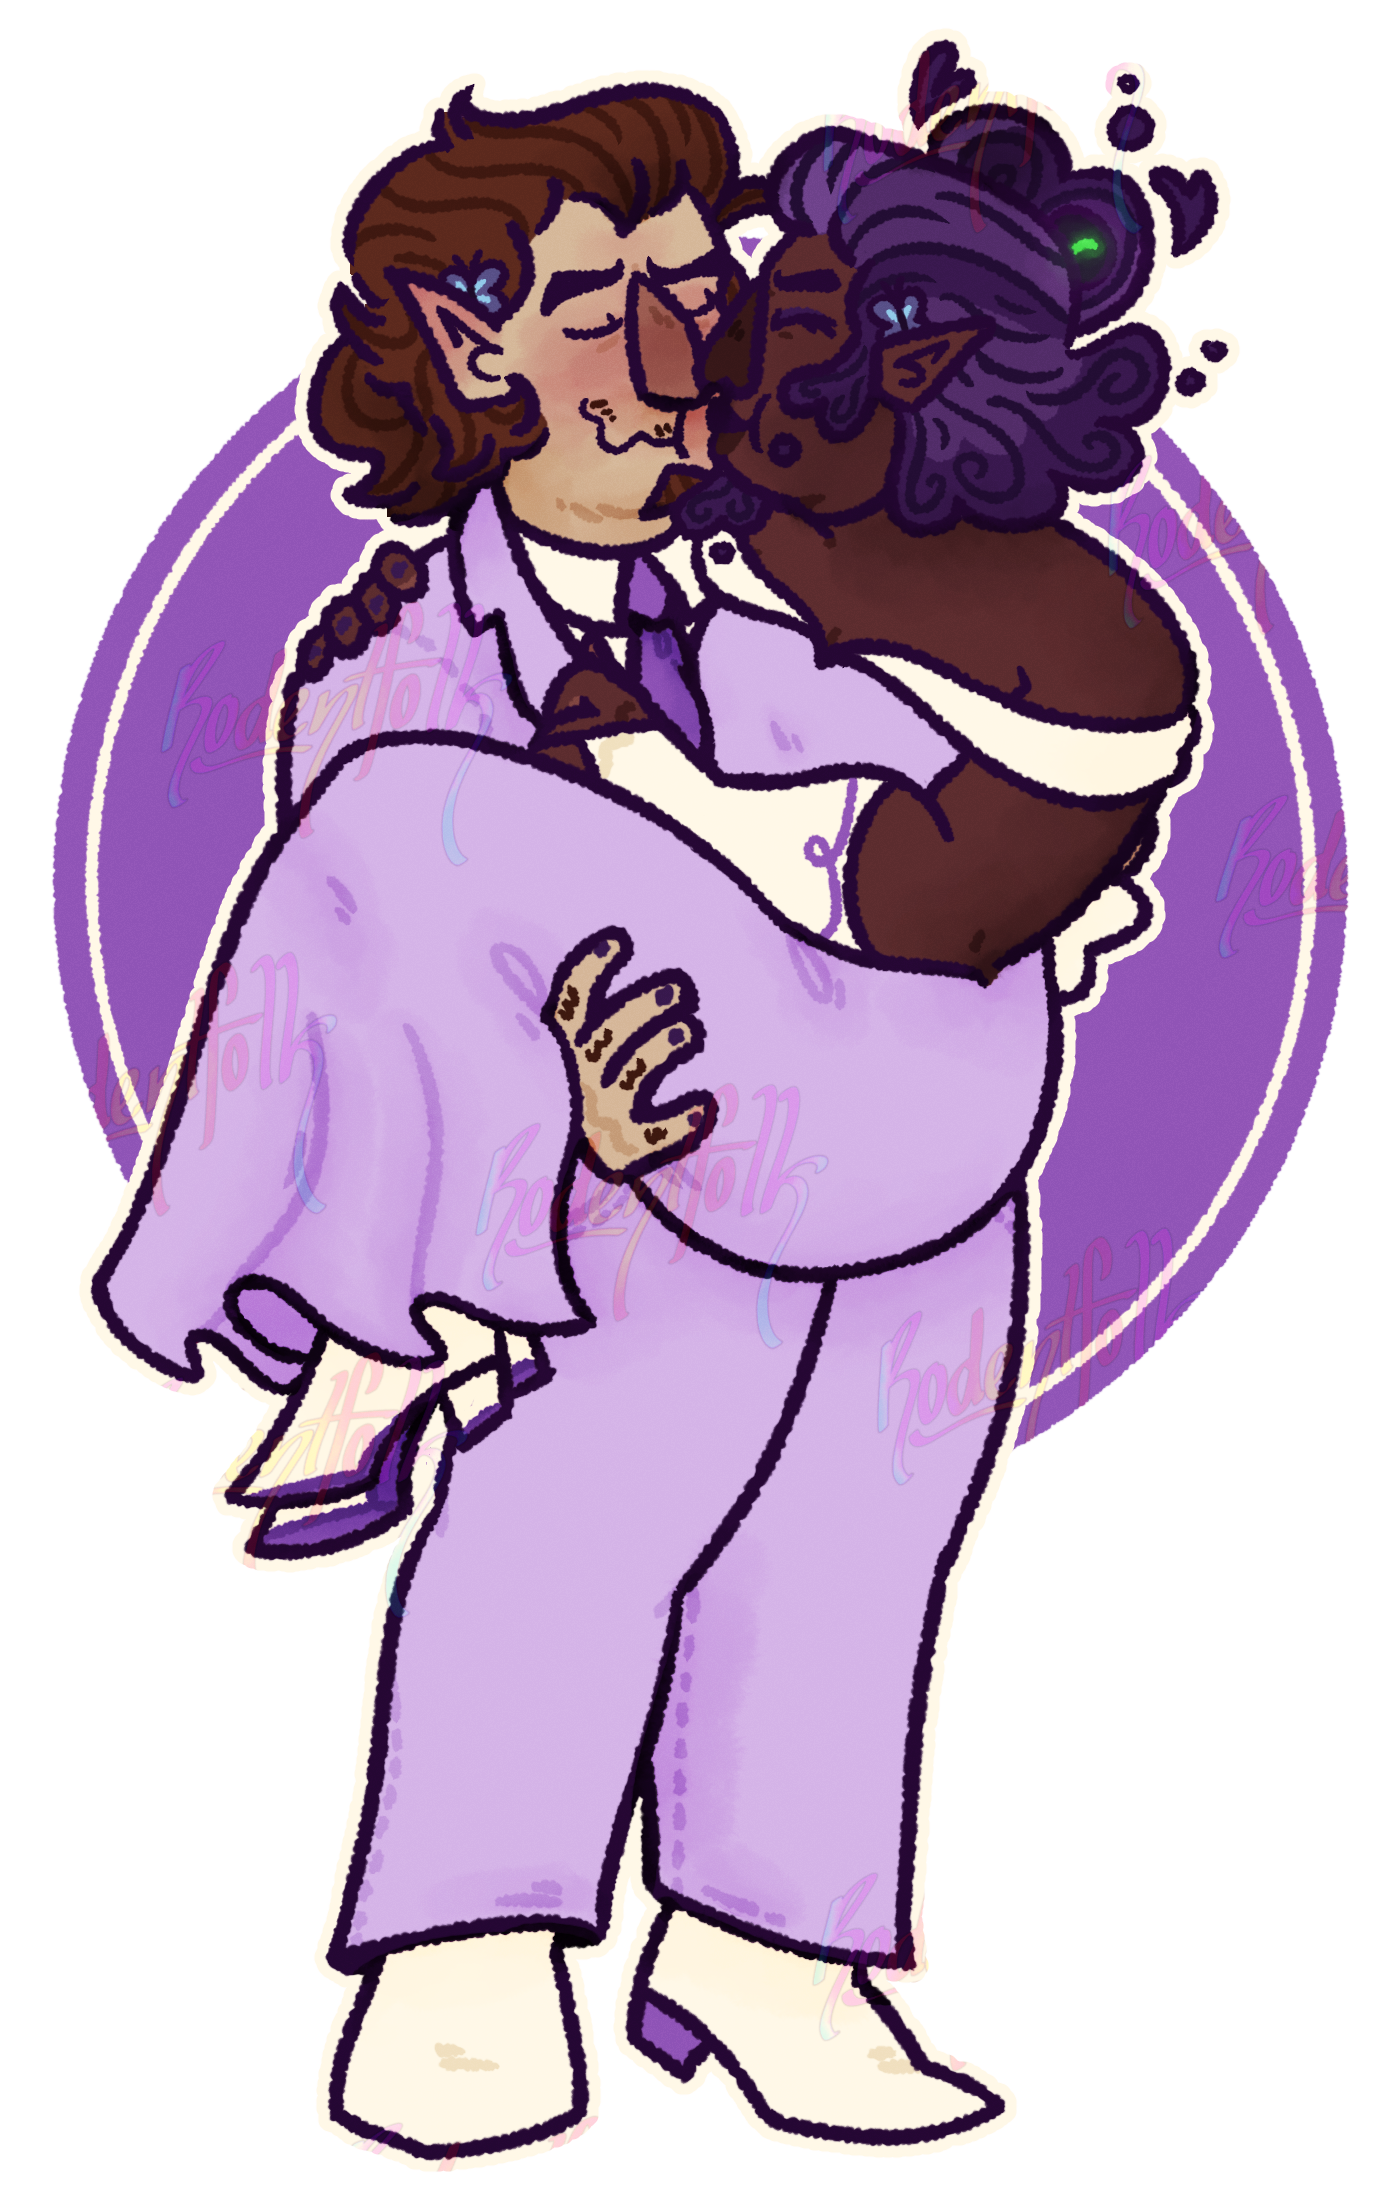 It is an illustration of Alador Blight and Darius Deamonne from The Owl House. They are dressed in wedding attire, with Alador bridal carrying Darius, who is kissing him on the cheek as they both have their eyes closed. Alador is blushing immensely, with a goofy smile.  Darius' dress is lilac with white off-shoulder sleeves, and a white bow in the back. His fingerless gloves and heels are both white, with deep purple accenting in the embroidery of the gloves, and on the bottom of the heels. His abomination hair and beard are creating love hearts, while the green eye in the back of his hair is visibly happy.  Alador is wearing a matching lilac tuxedo, with a white shirt and deep purple tie. His shoes are similar to Darius' except the heel is shorter, and completely purple. His hair is slicked back and styled in a ponytail in the back.  They are both also wearing matching blue butterfly clips in their hair, as well as matching dark purple nail polish.